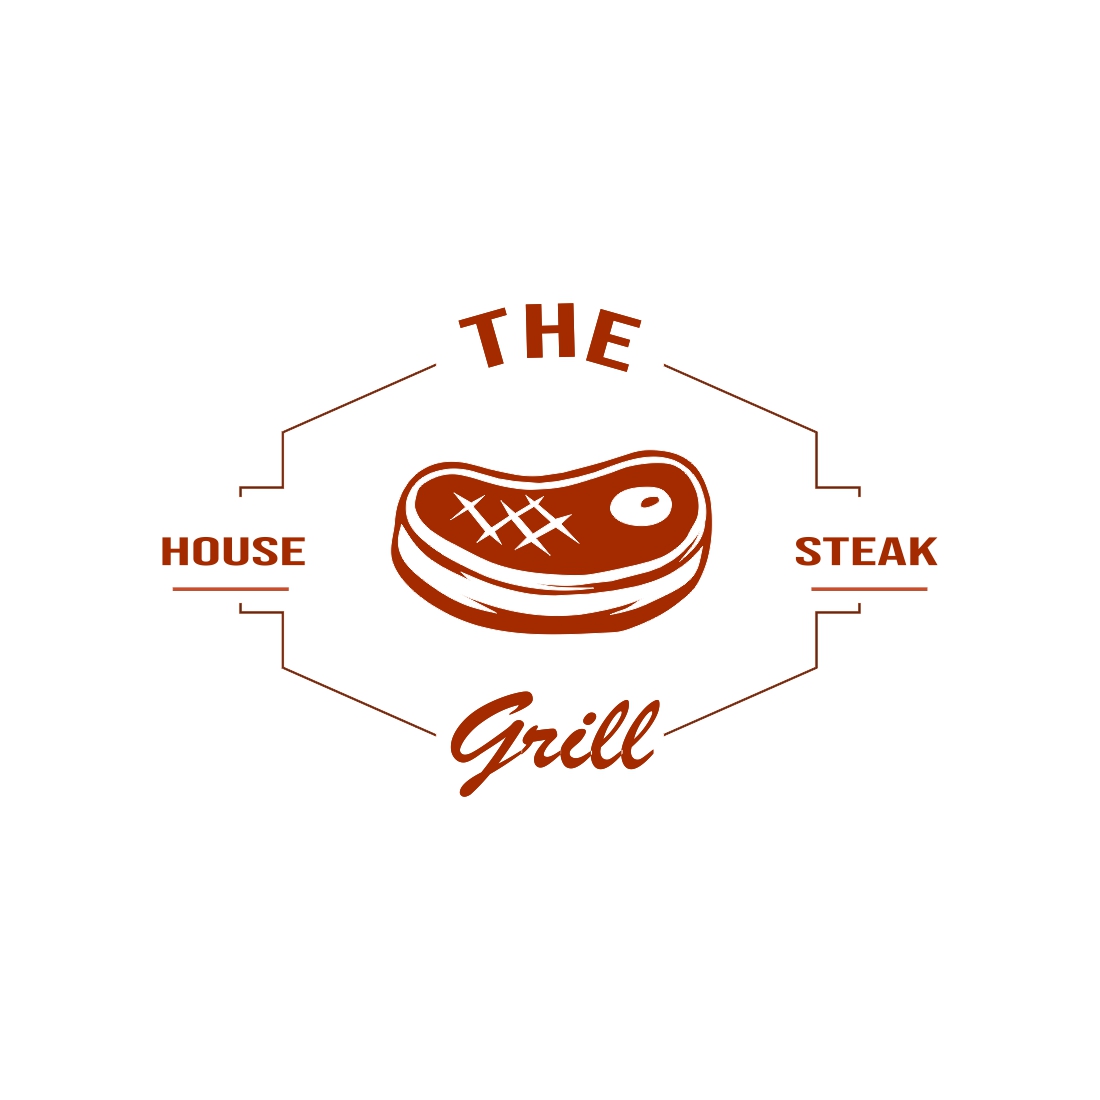 Steak comes from beef steak, which means a piece of meat logo preview image.